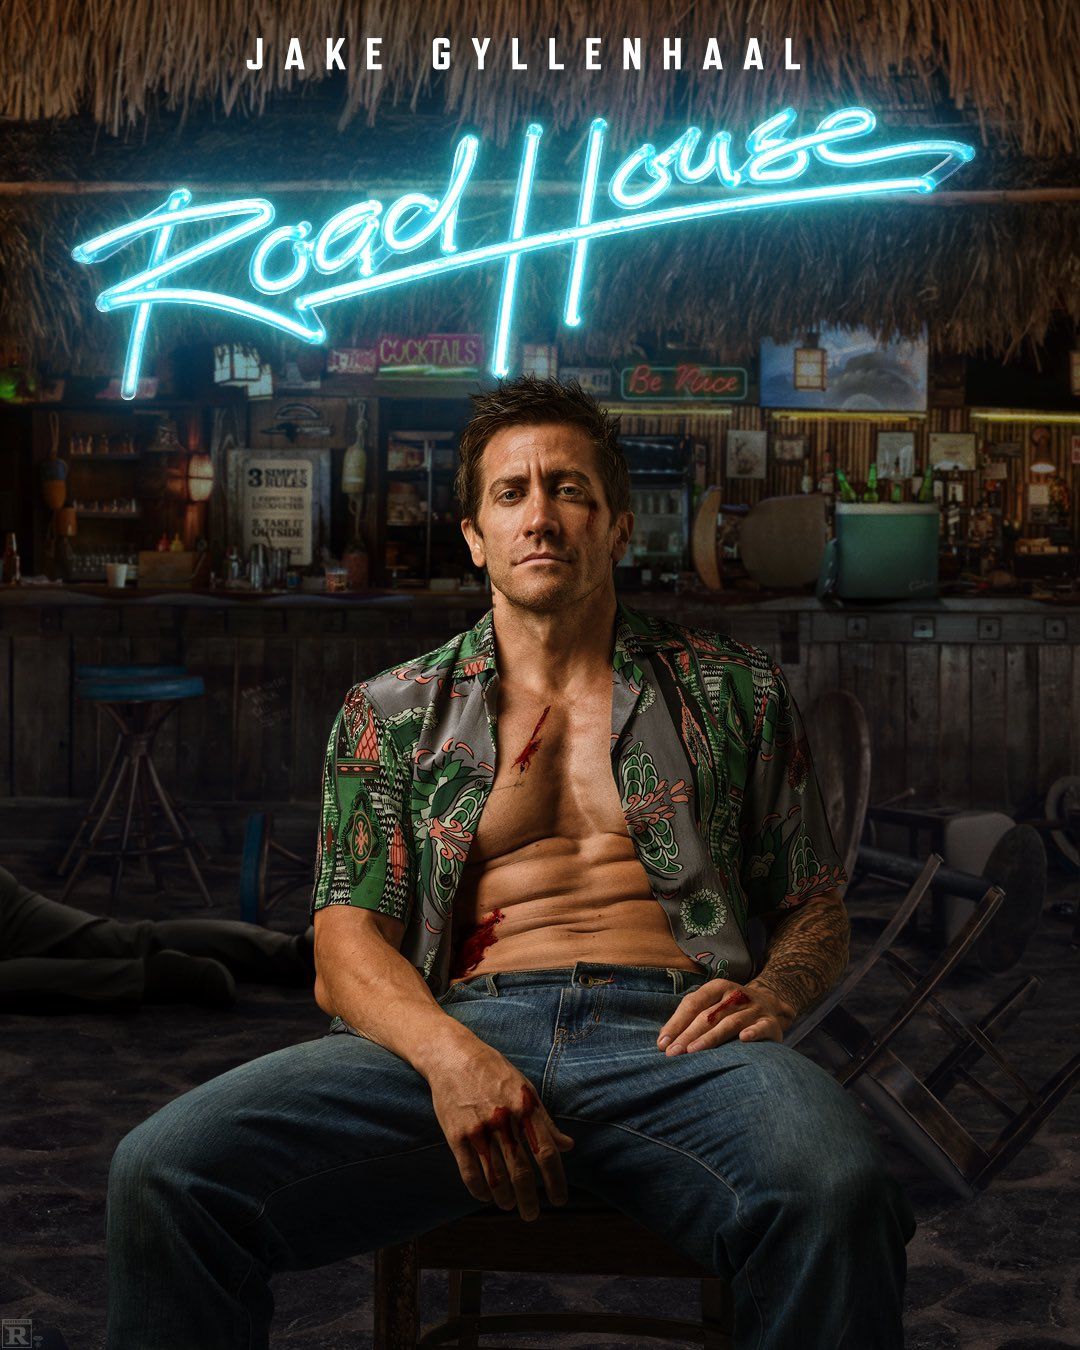 Road House Remake Poster Is Filled With Easter Eggs Paying Tribute to